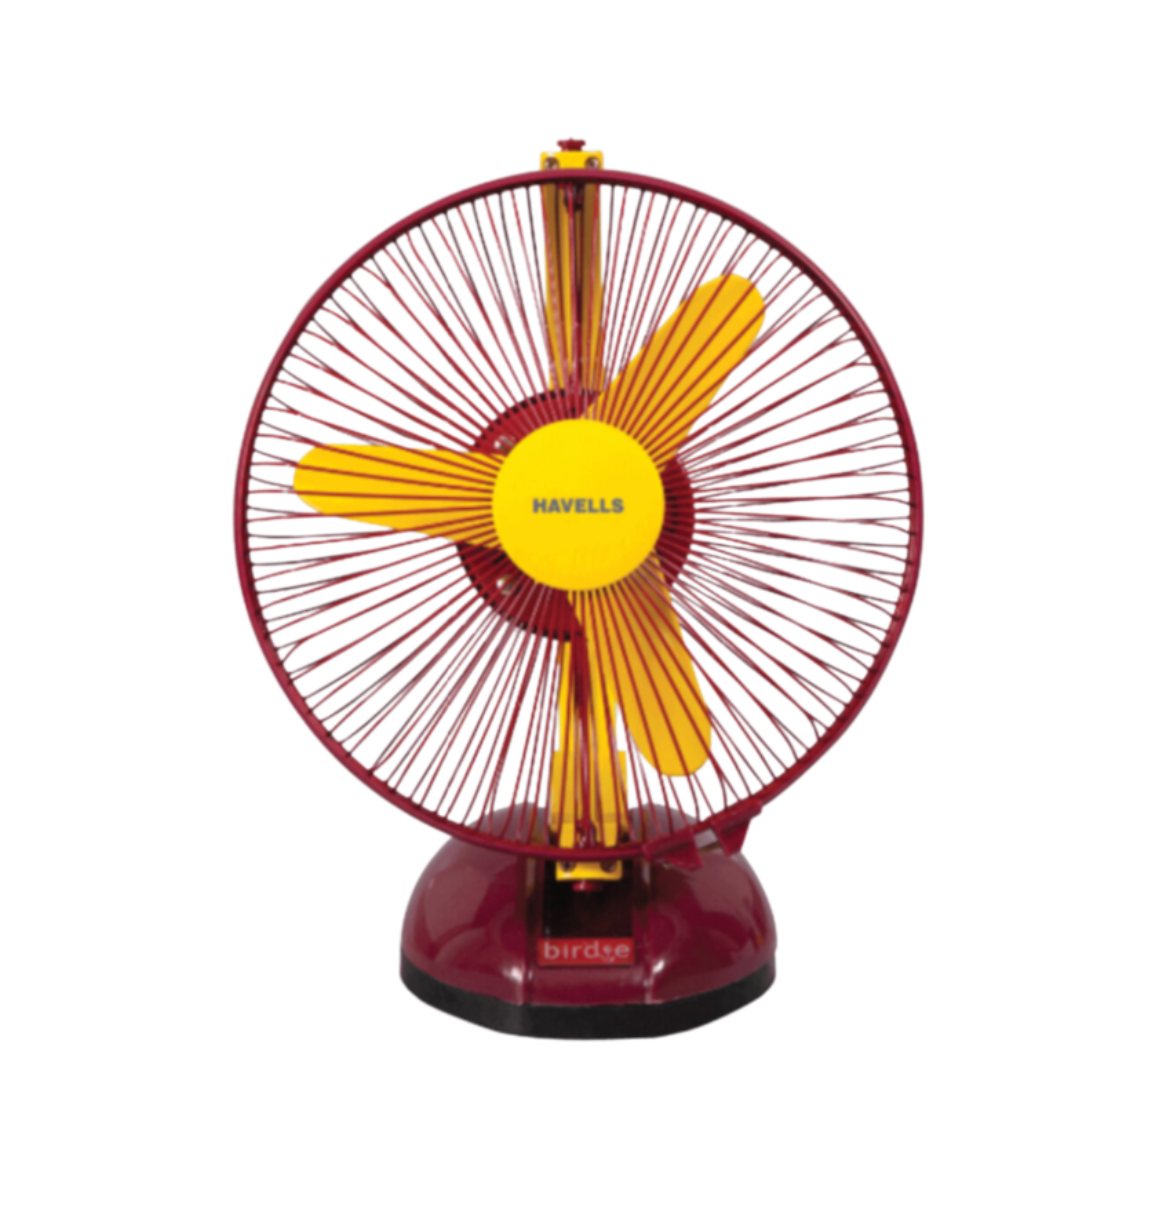 Havells Birdie 230 mm Personal Fan Yellow And Maroon